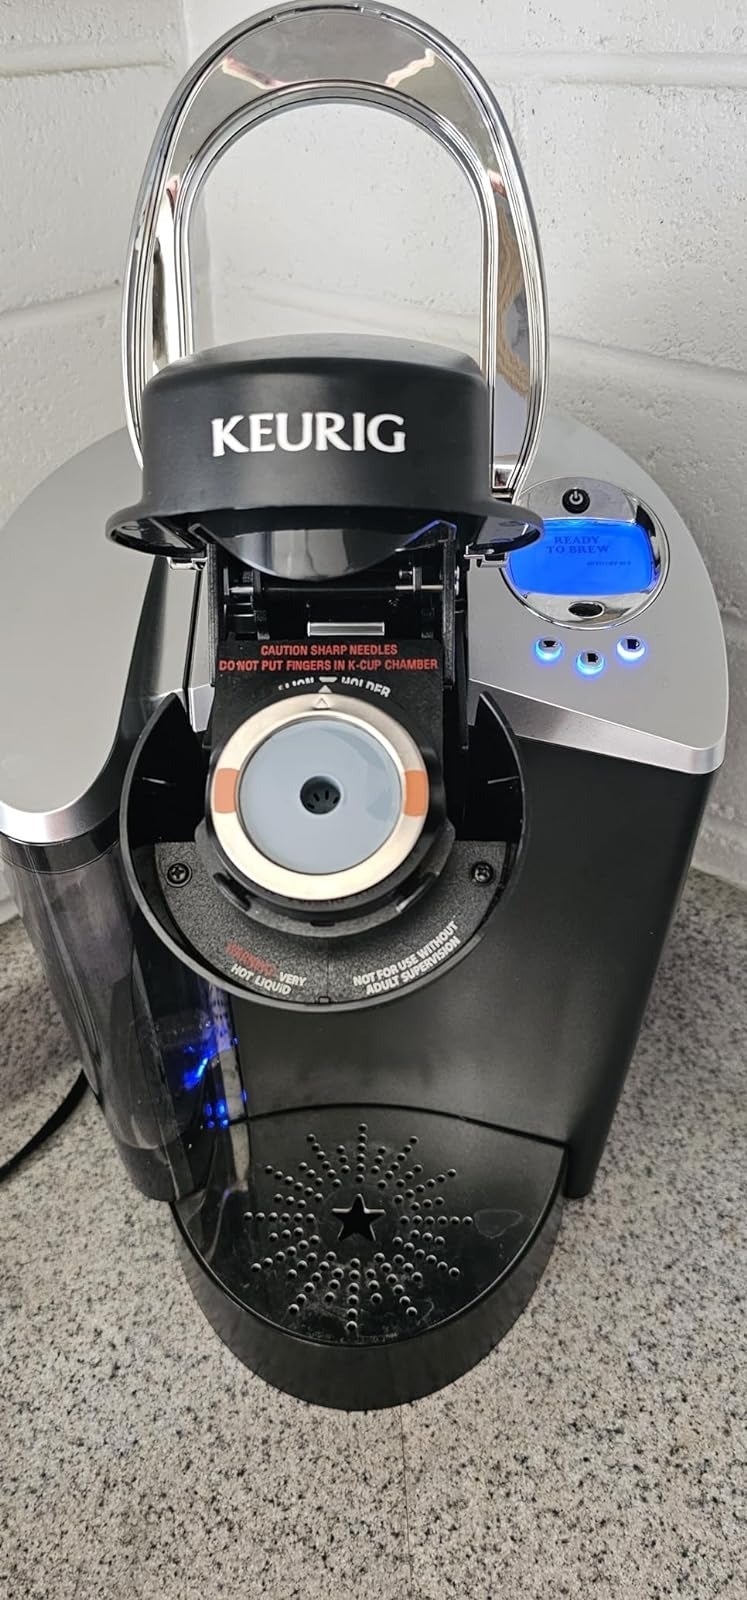 Keurig K-Express nails convenience, but sacrifices too much to achieve it